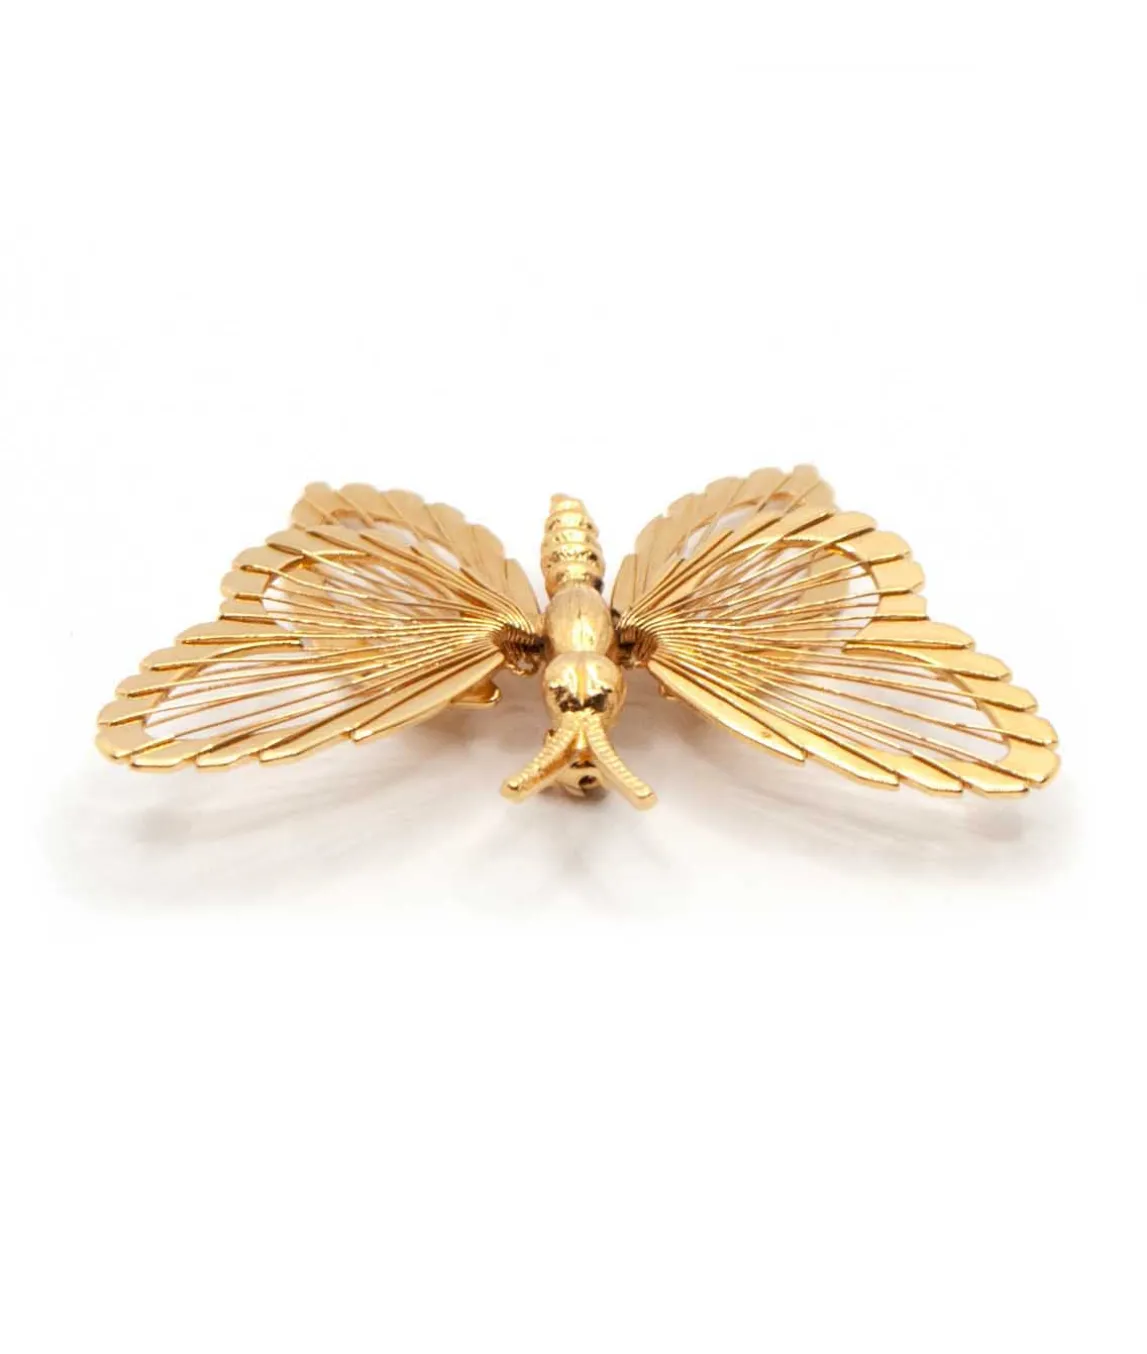 Gold tone butterfly brooch pin by Monet profile from front